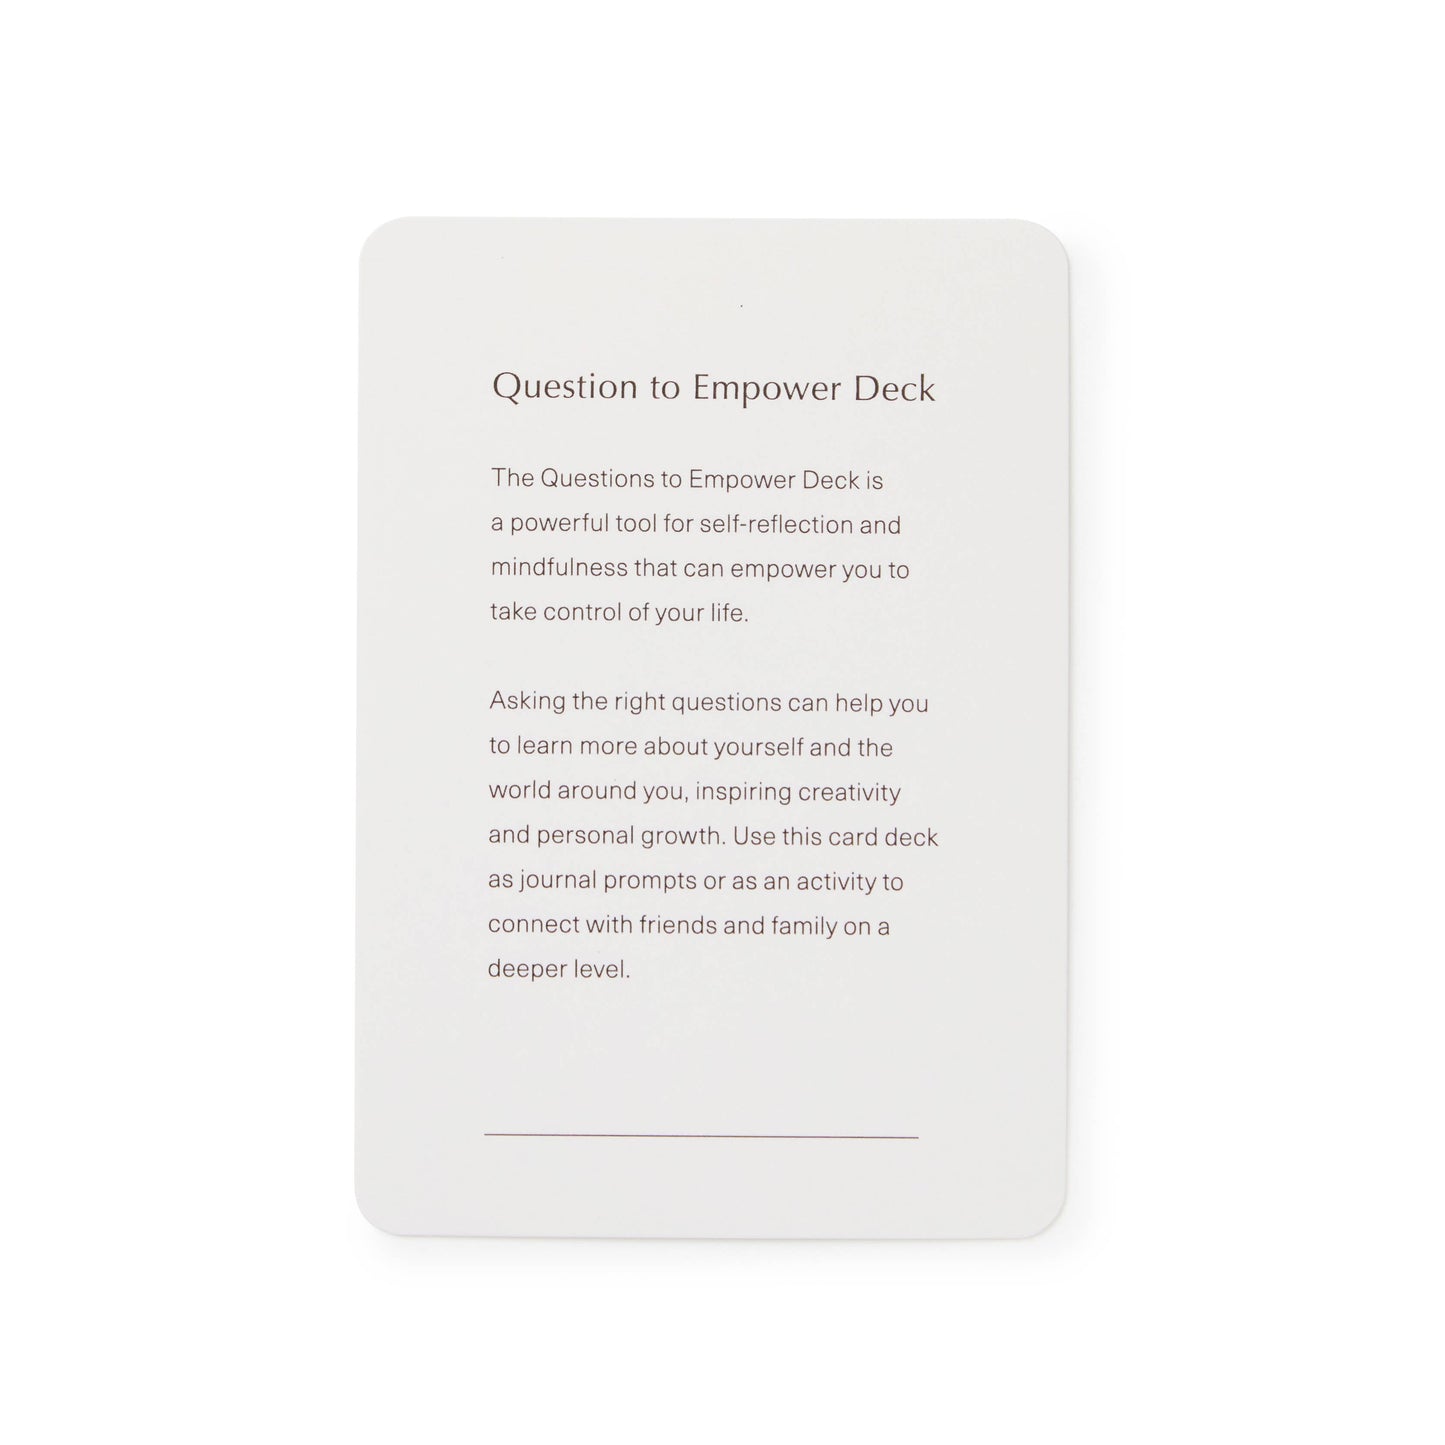 Questions to Empower Card Deck - Mindfulness Gift